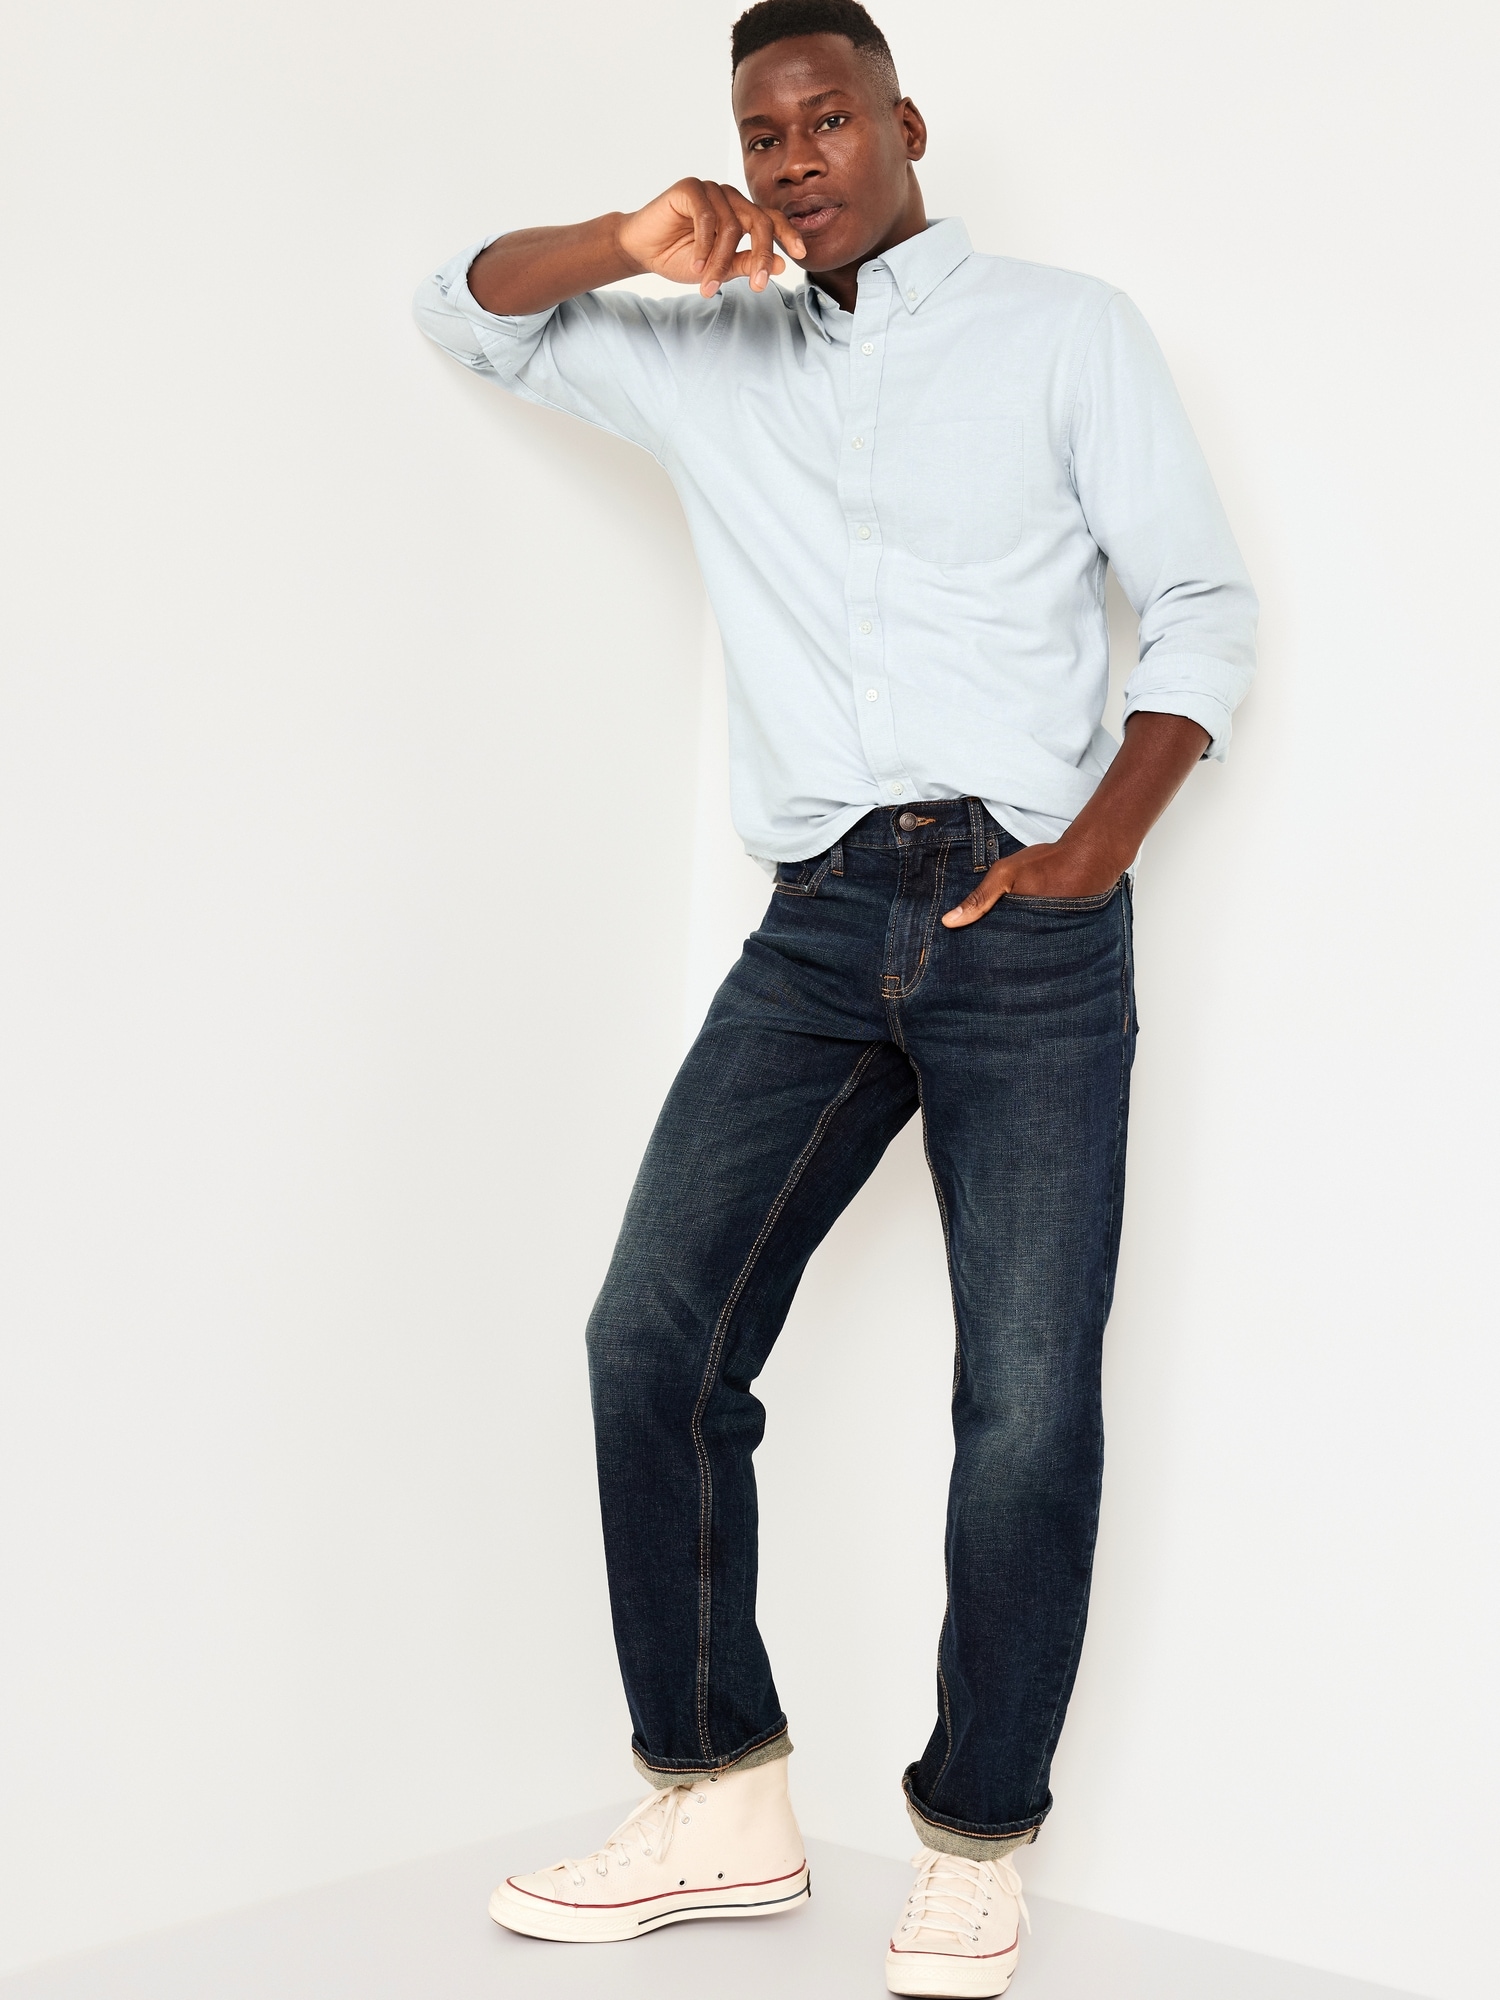 Classic Fit Everyday Oxford Shirt | Old Navy